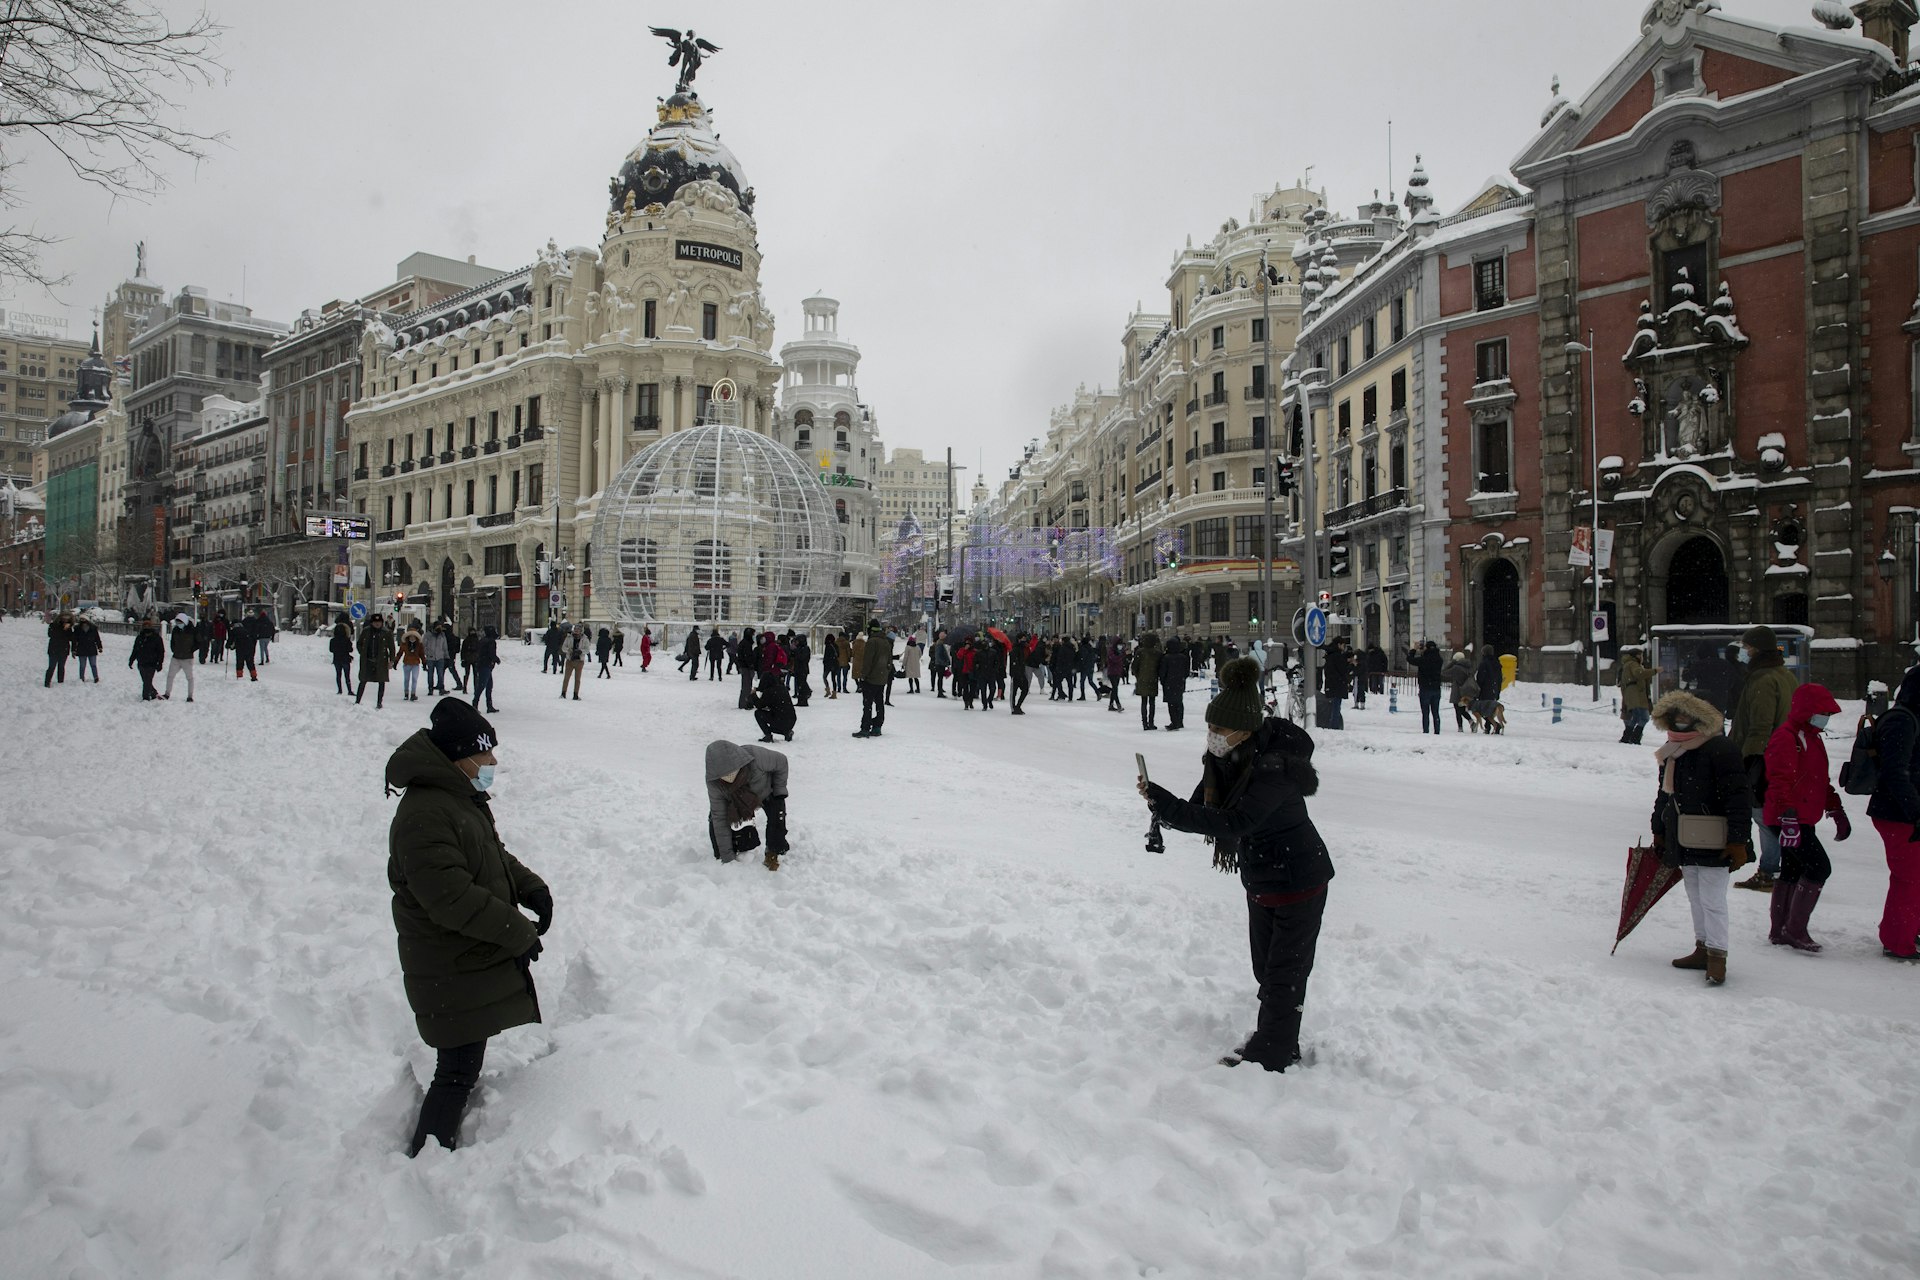 People gathering in Madrid's Calle Alcalá to experience the snow